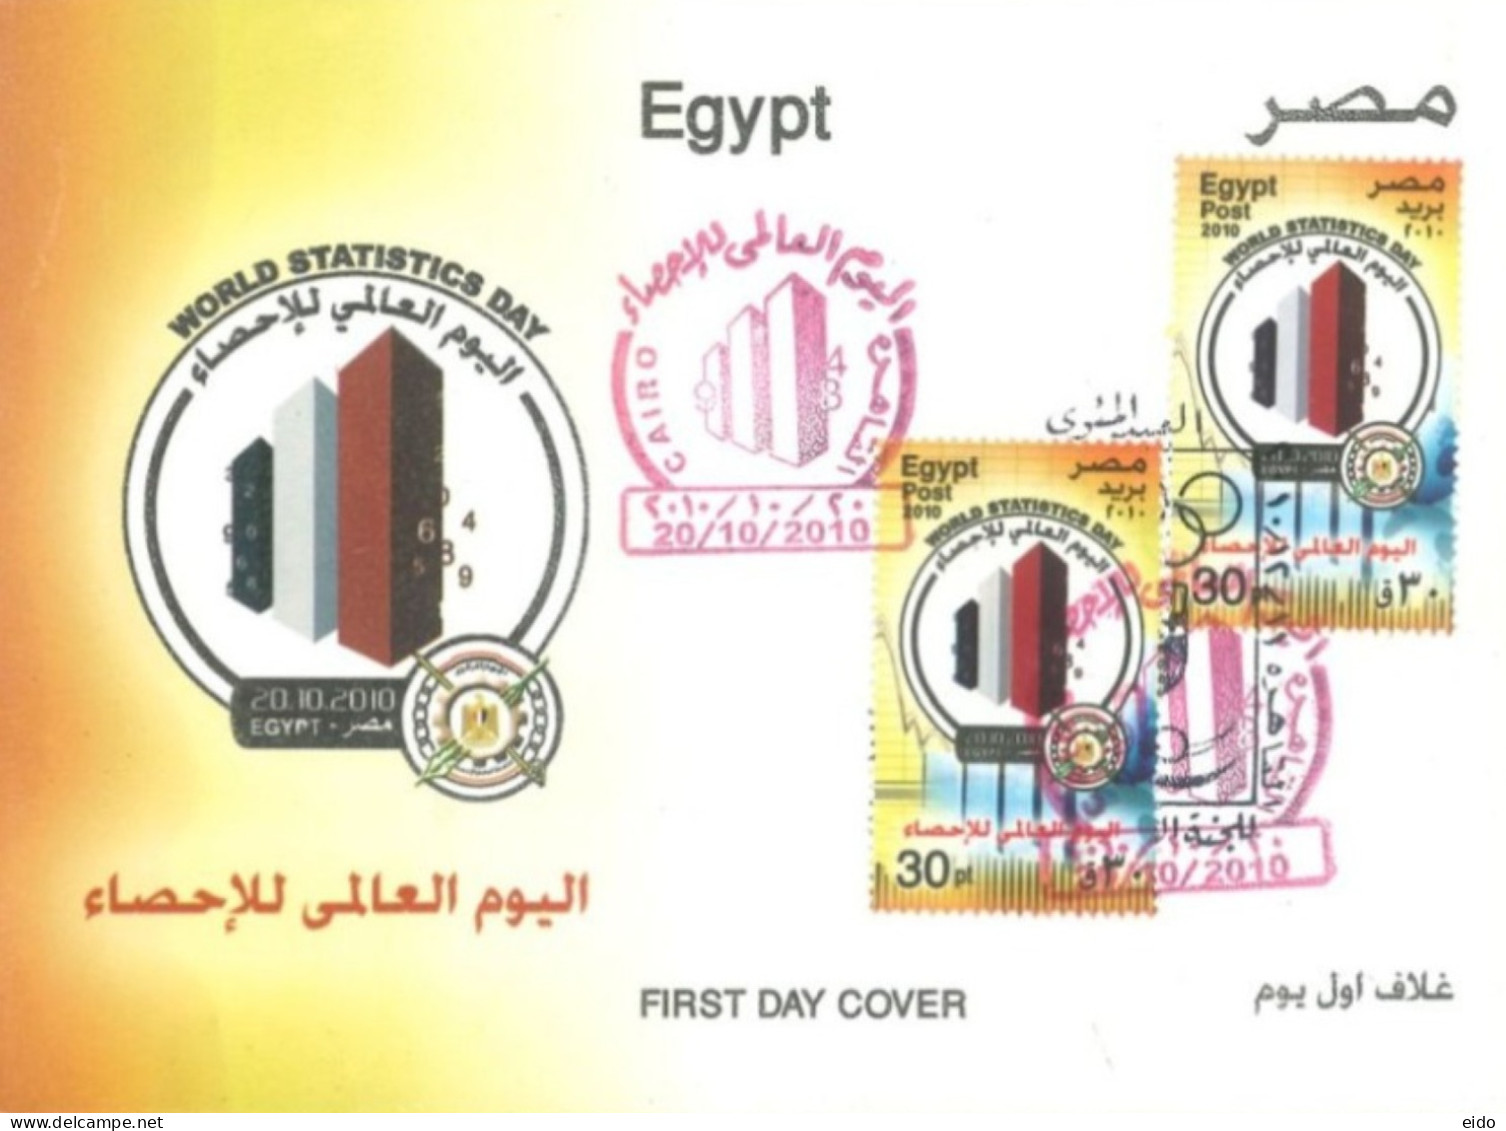 EGYPT - 2010, F.D.C. STAMPS OF WORLD STATISTICS DAY. - Lettres & Documents